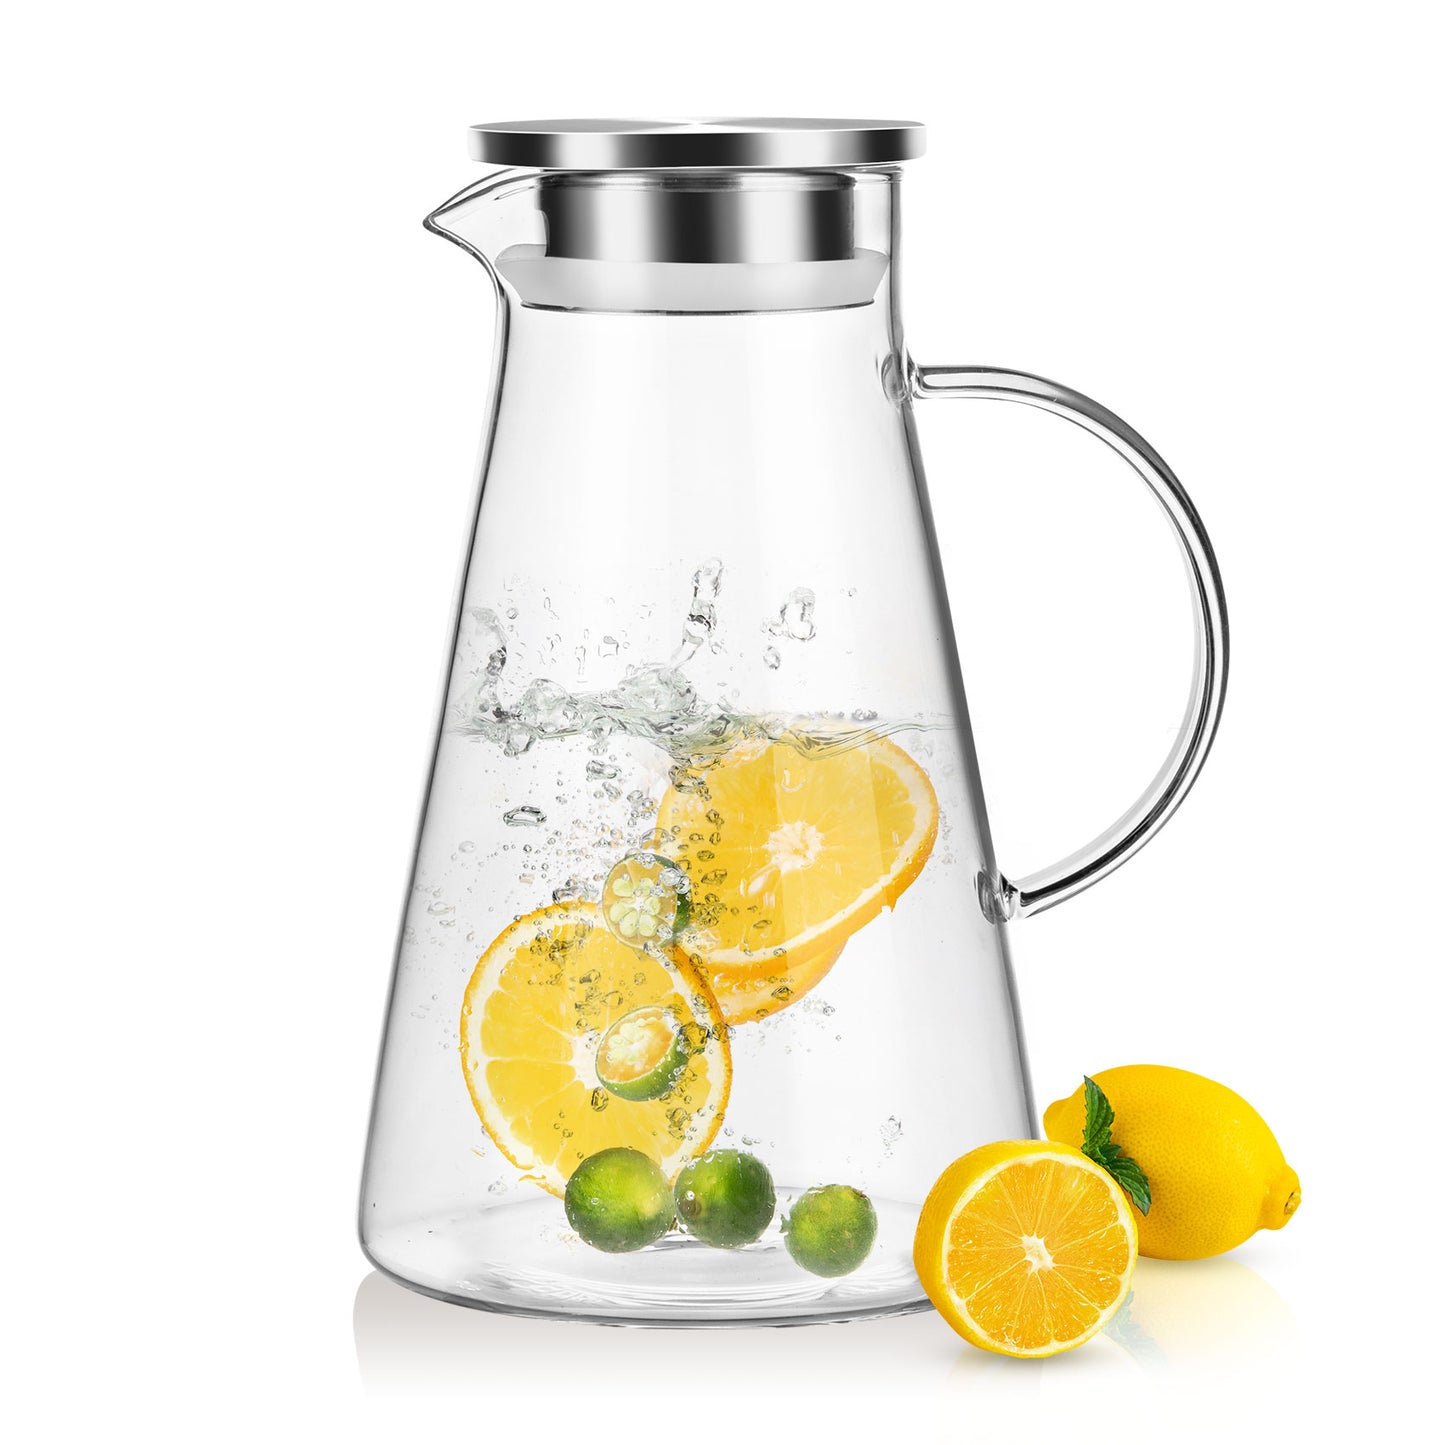 2 Liter 68oz Glass Pitcher With Lid